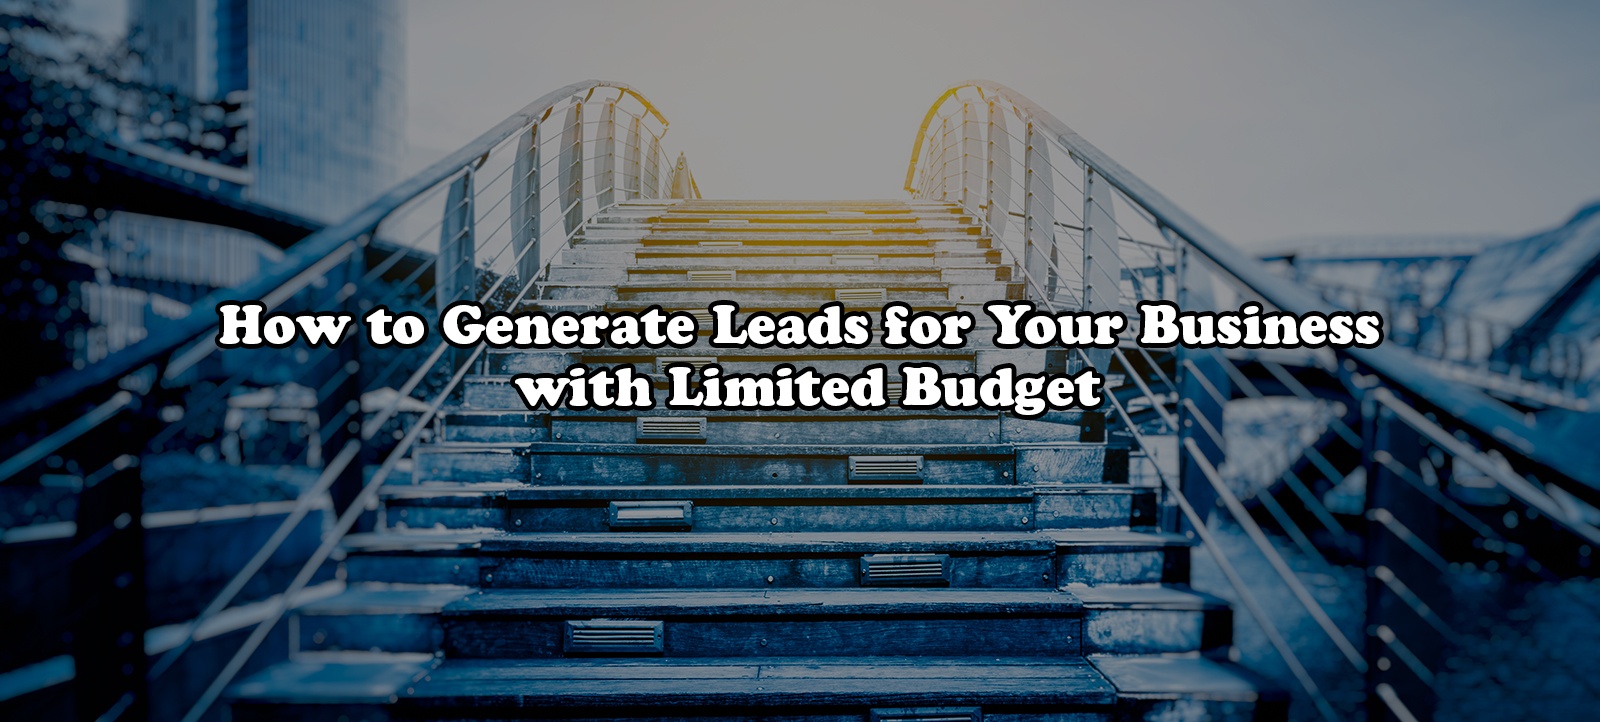 How to generate leads for your business with limited budget